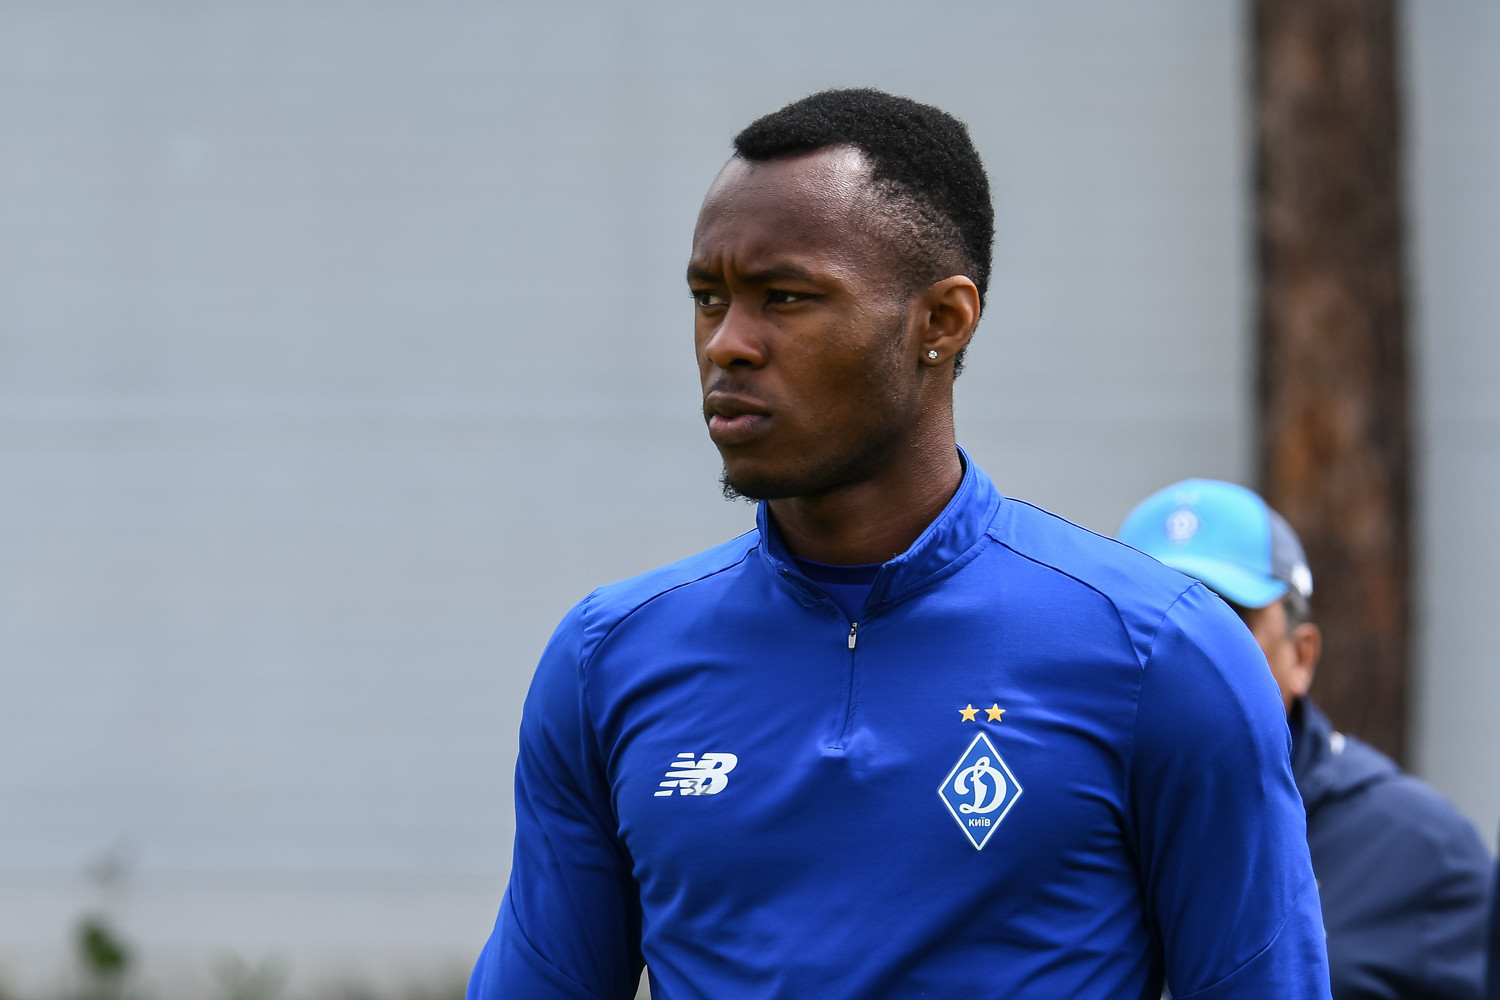 Benito and Kargbo to feature for Olimpik on loan